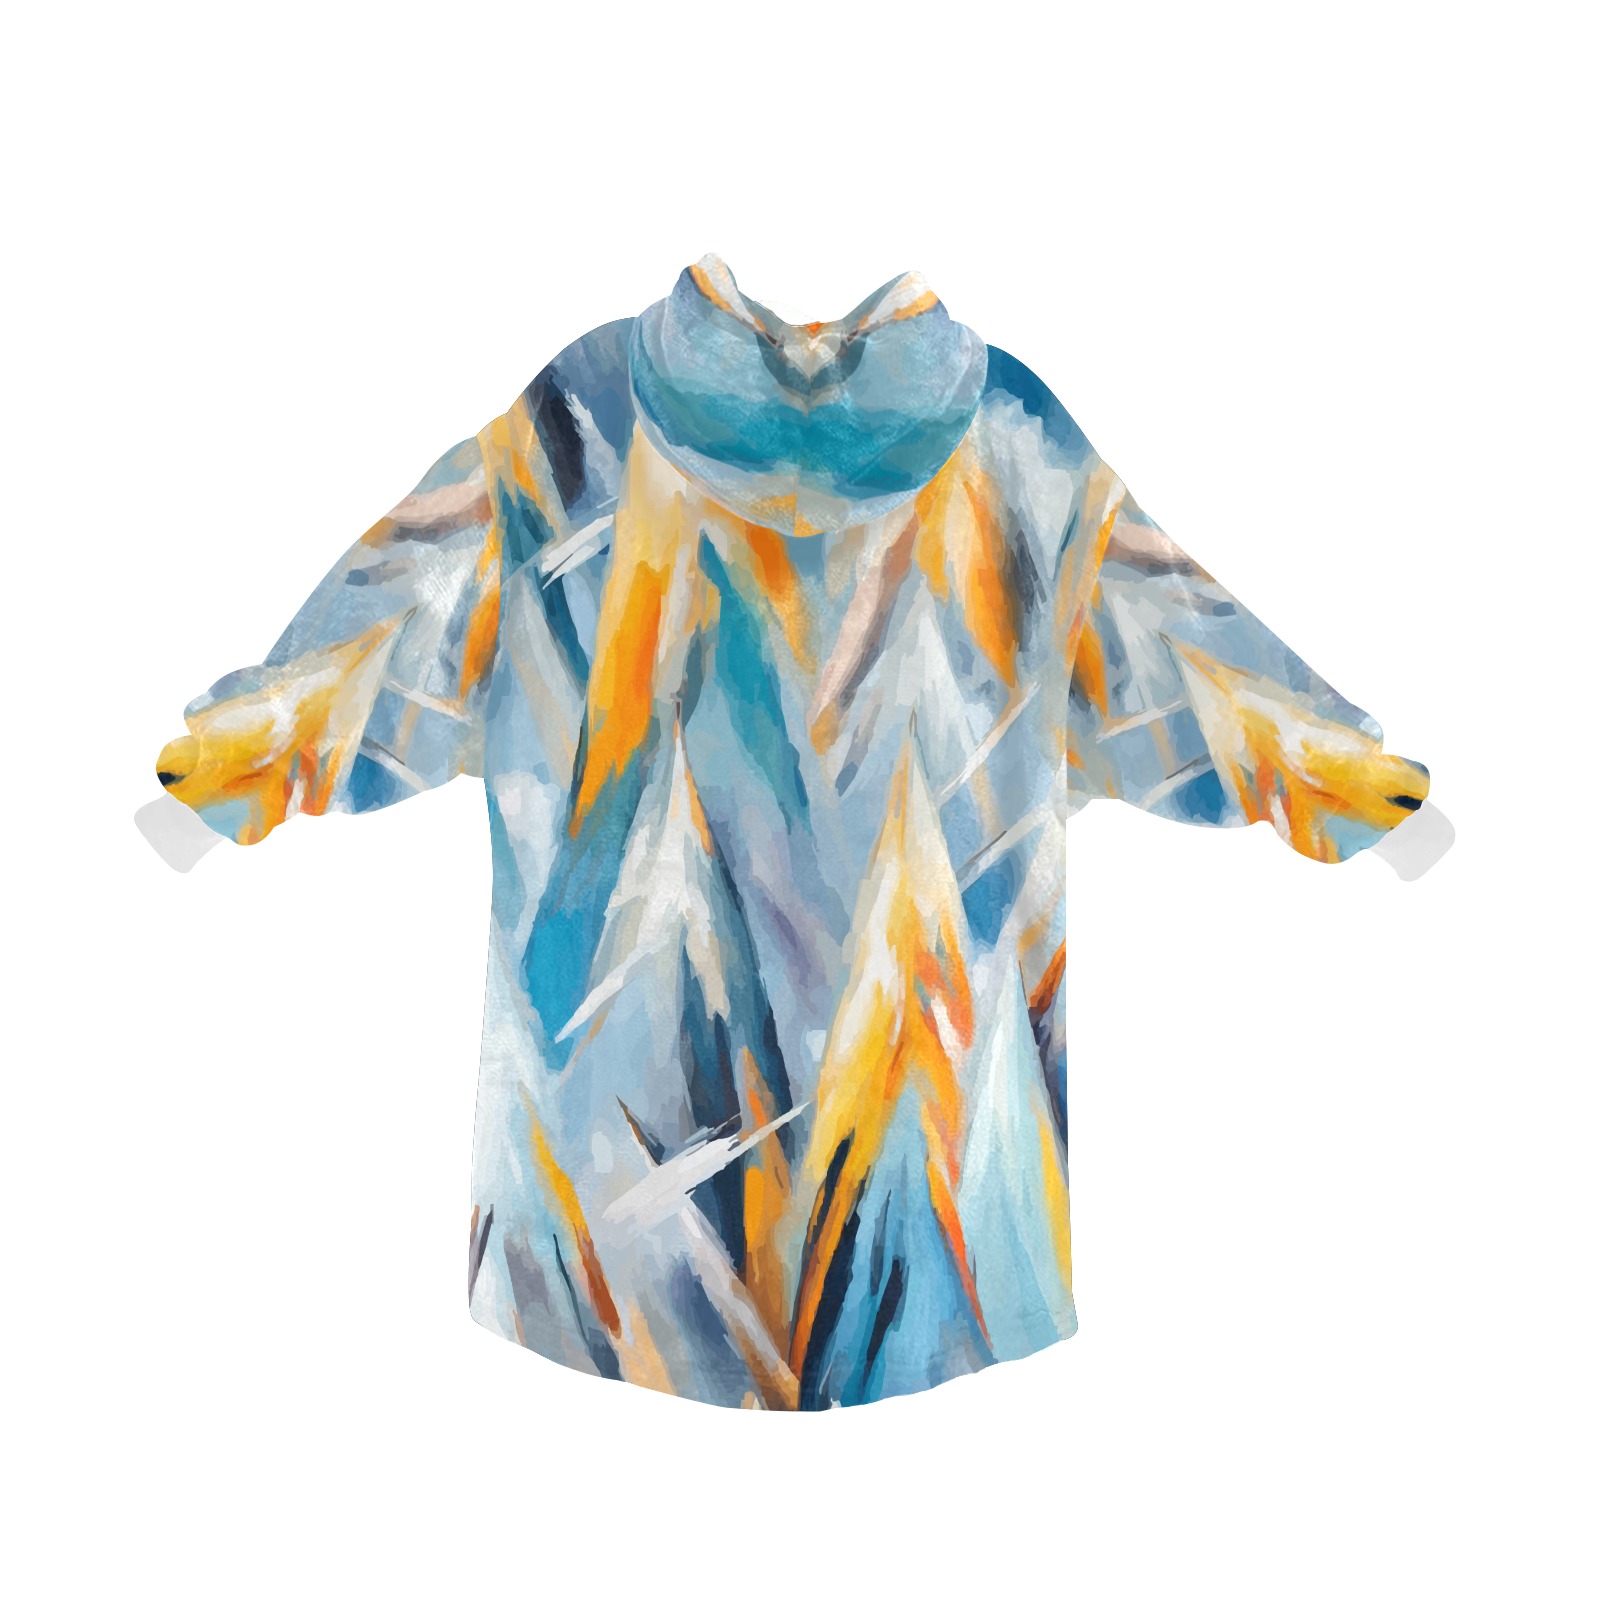 Abstract pattern of winter mountains or trees Blanket Hoodie for Men